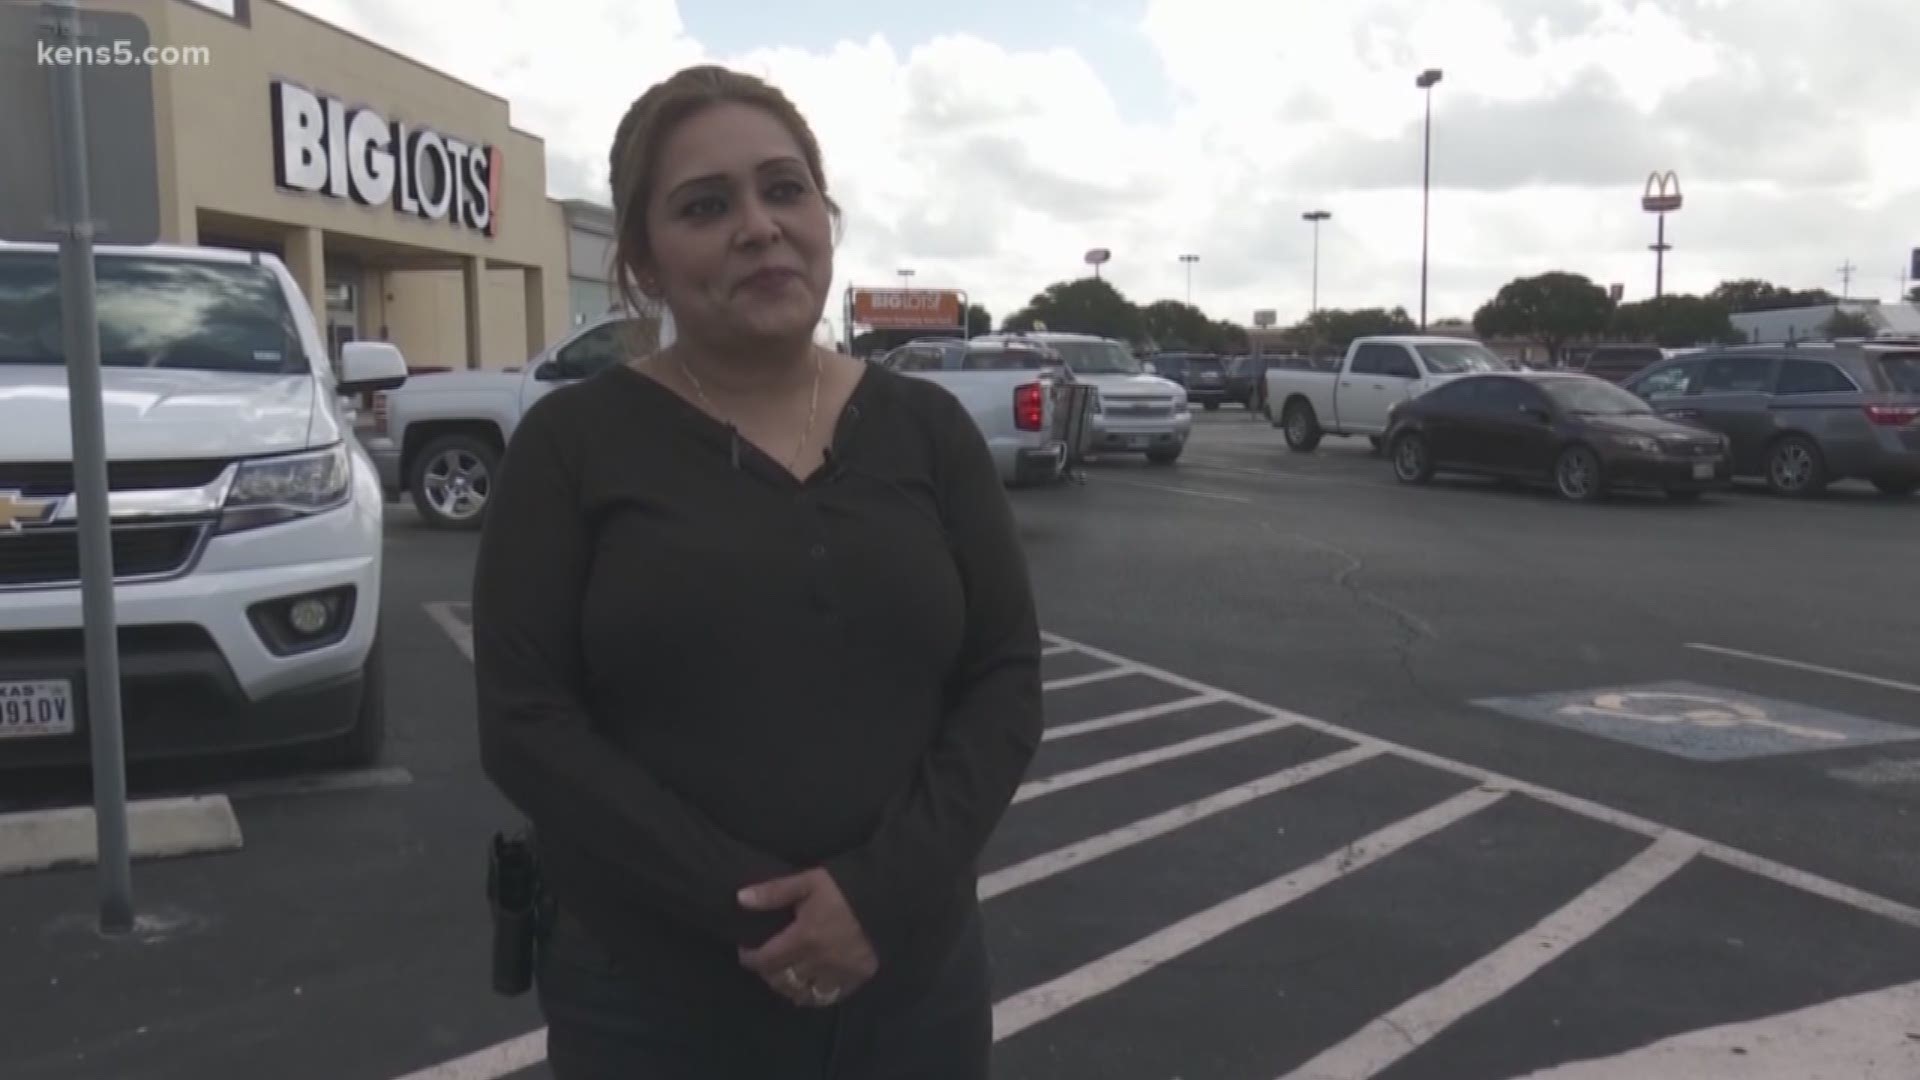 The lawsuit asks the court to "declare that (Michelle Barrientes Vela) never resigned from the office of Constable" when she announced her candidacy for sheriff.